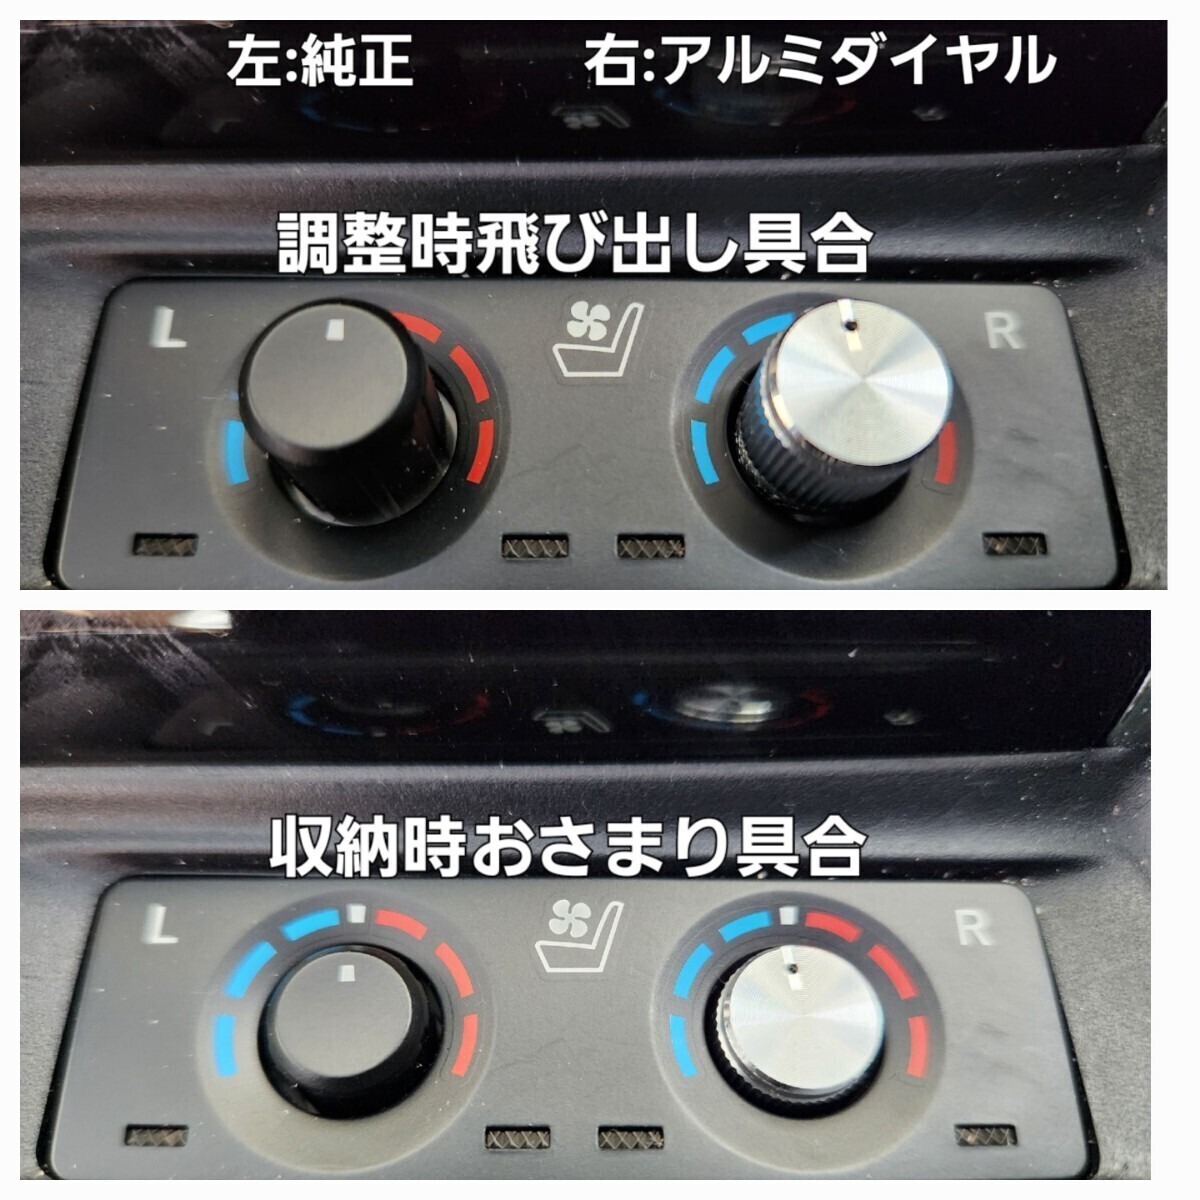  Alphard Vellfire 30 series seat heater seat air conditioner acrylic fiber window . shines aluminium shaving (formation process during milling) adjustment dial switch window hole have tube 221